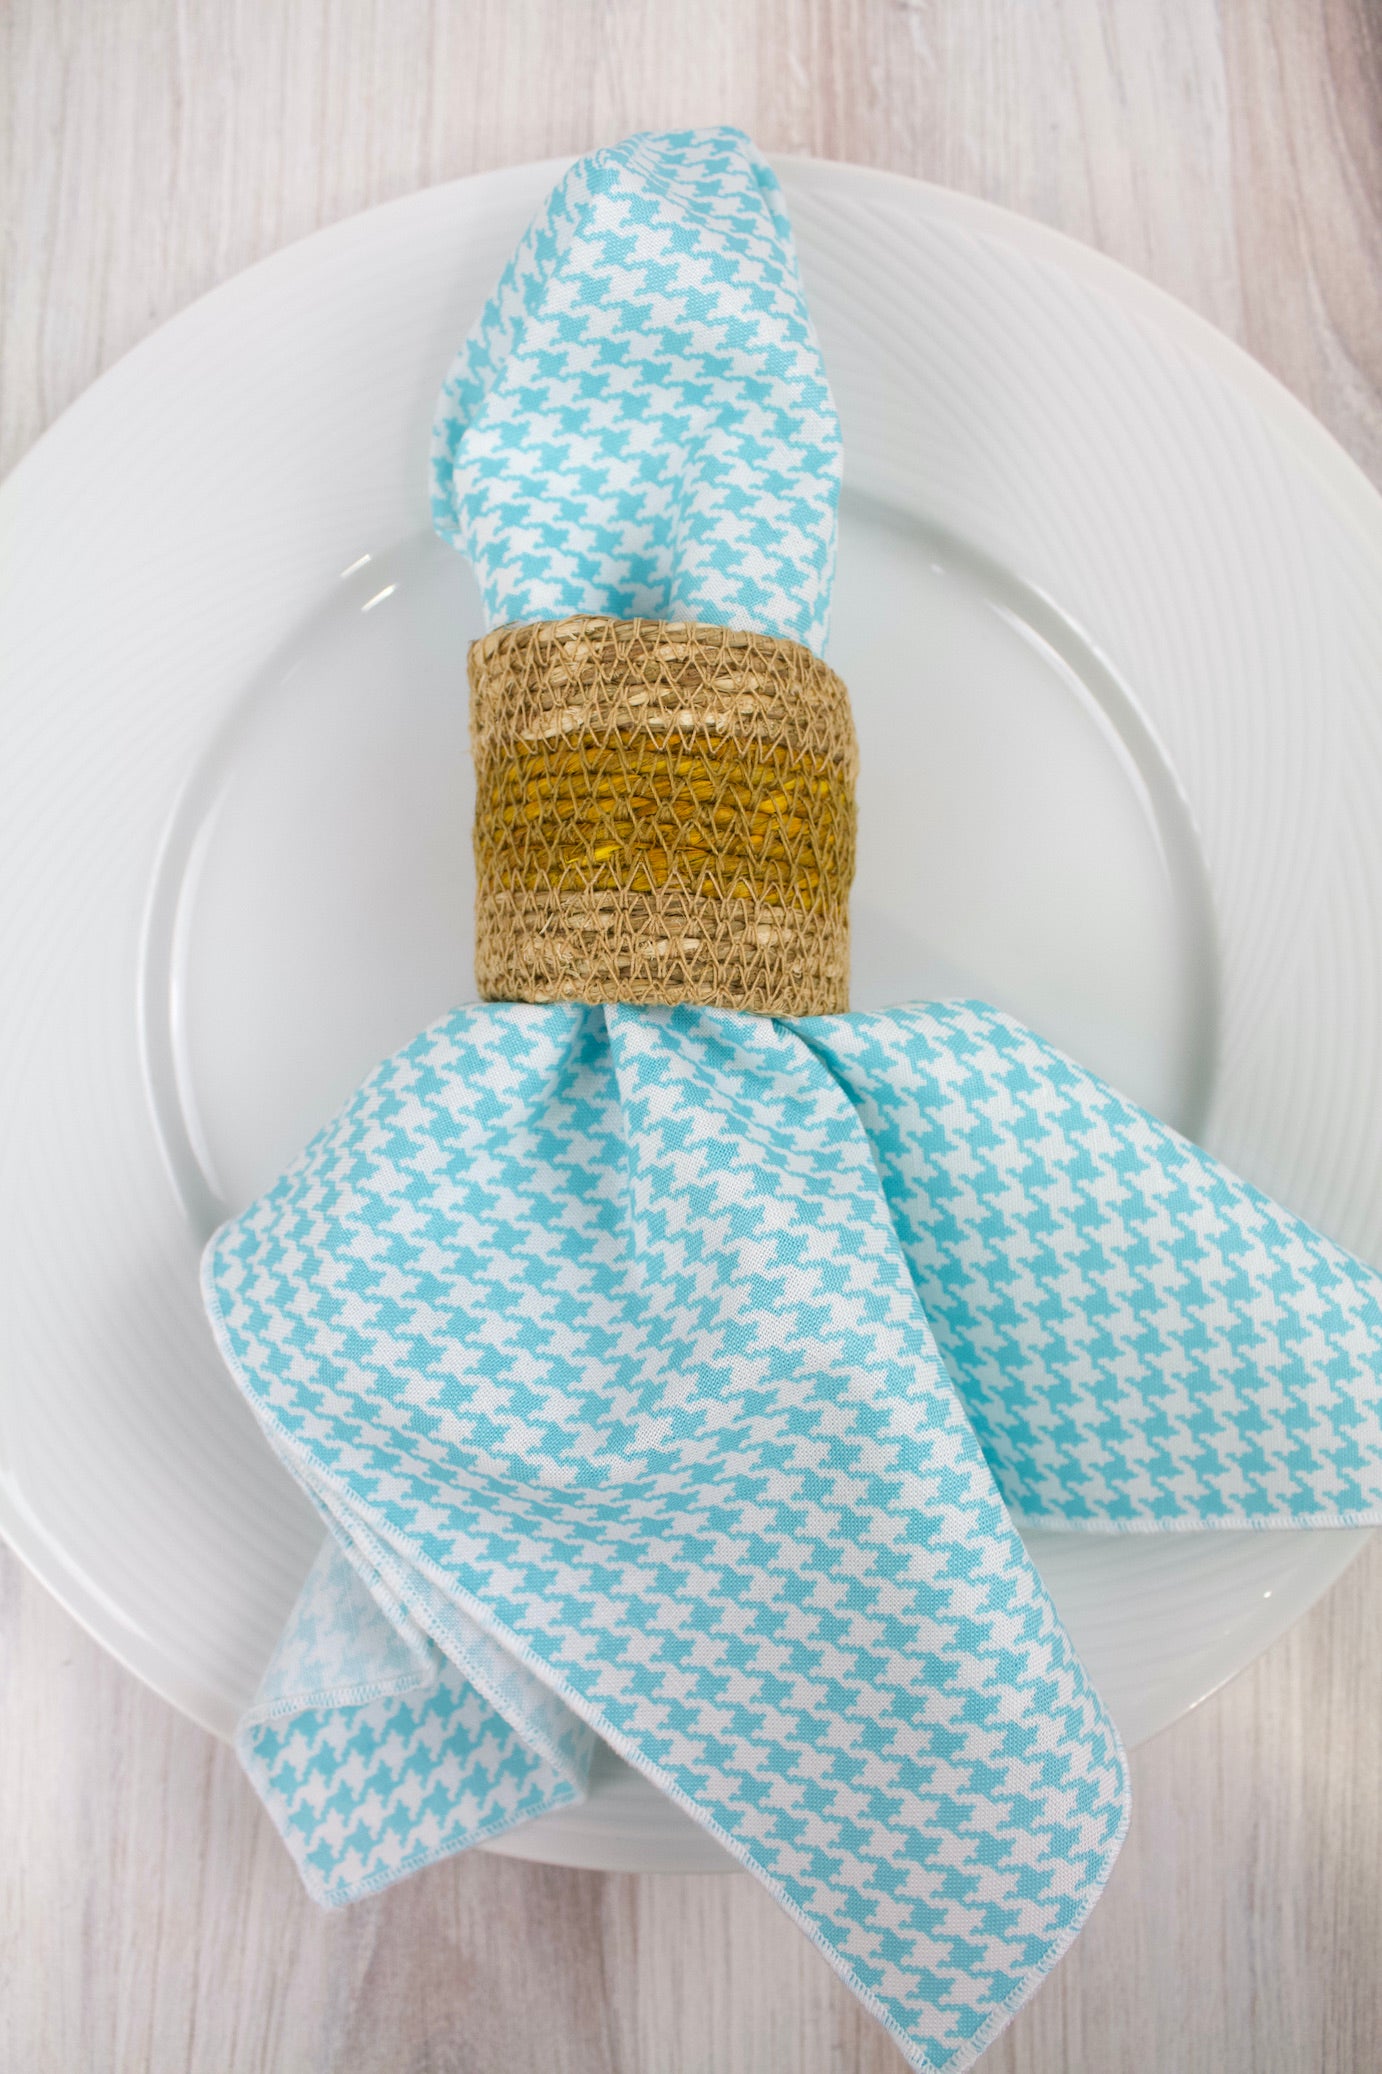 Mini Houndstooth Napkins in Aqua (Set of 4)-The Blue Peony-Category_Napkins,Category_Table Linens,Department_Kitchen,Material_Cotton